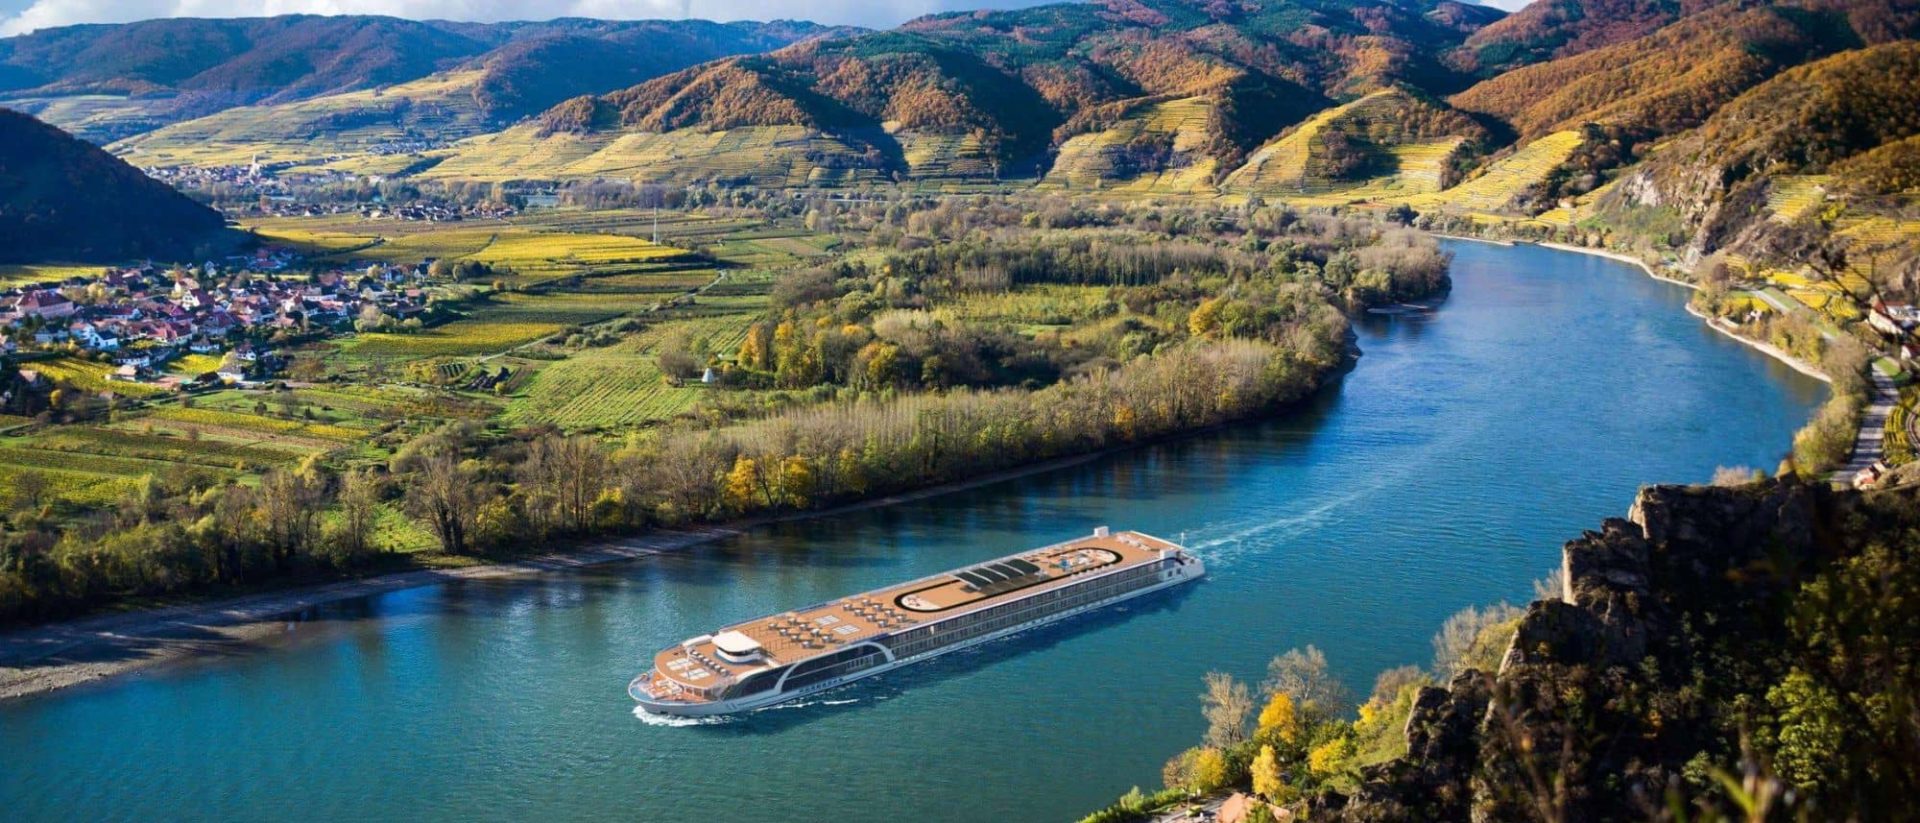 A cruise ship traveling down a river in a valley.